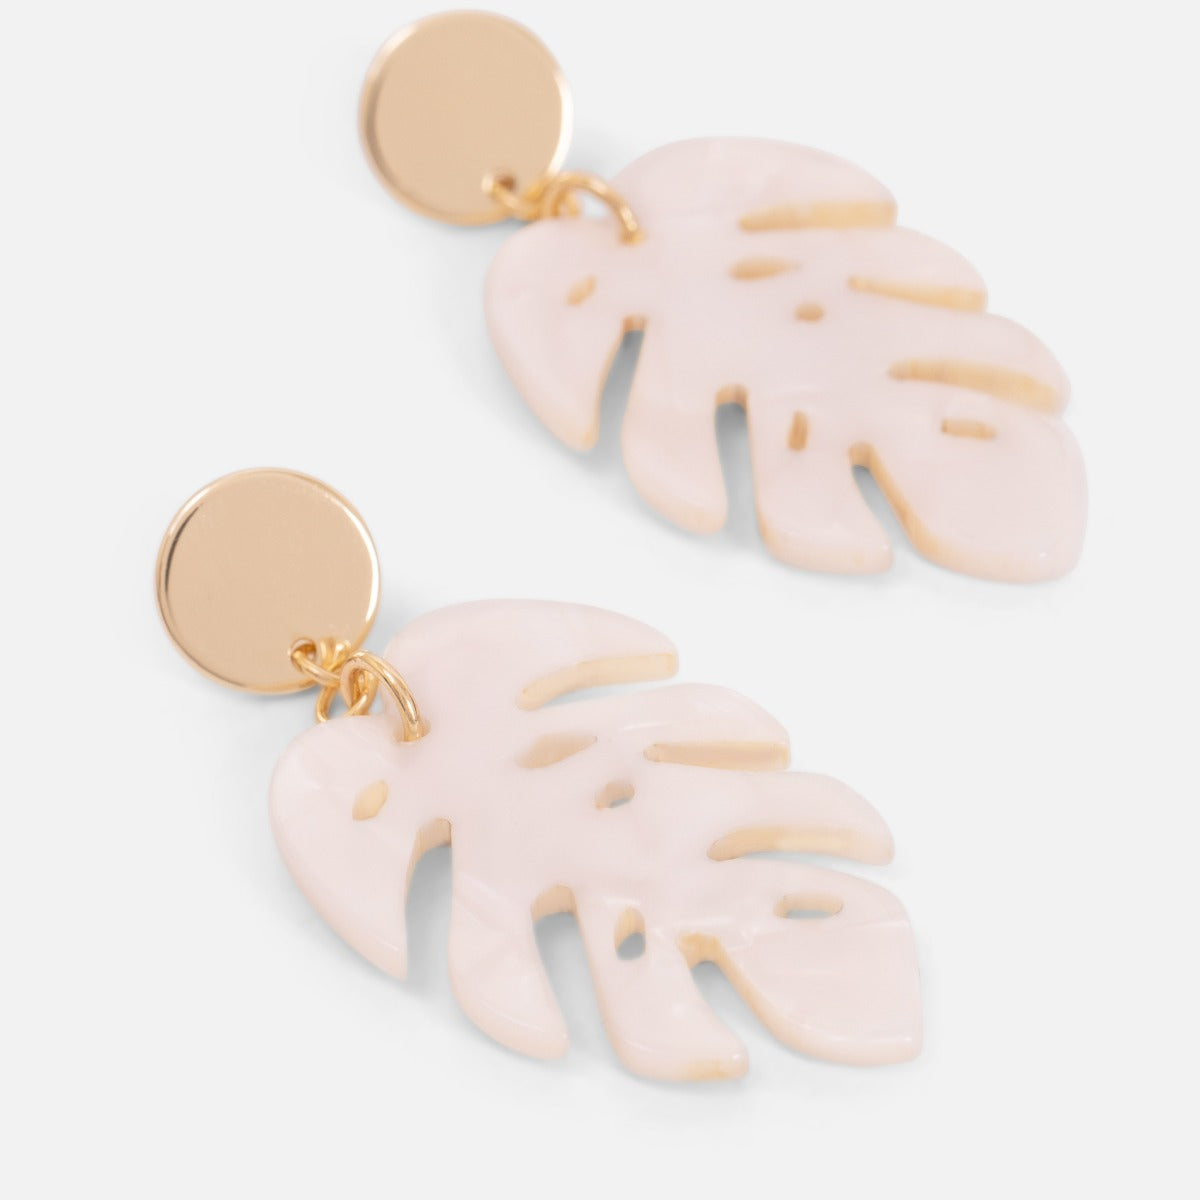 Long golden earrings with mother-of-pearl palm tree leave charm